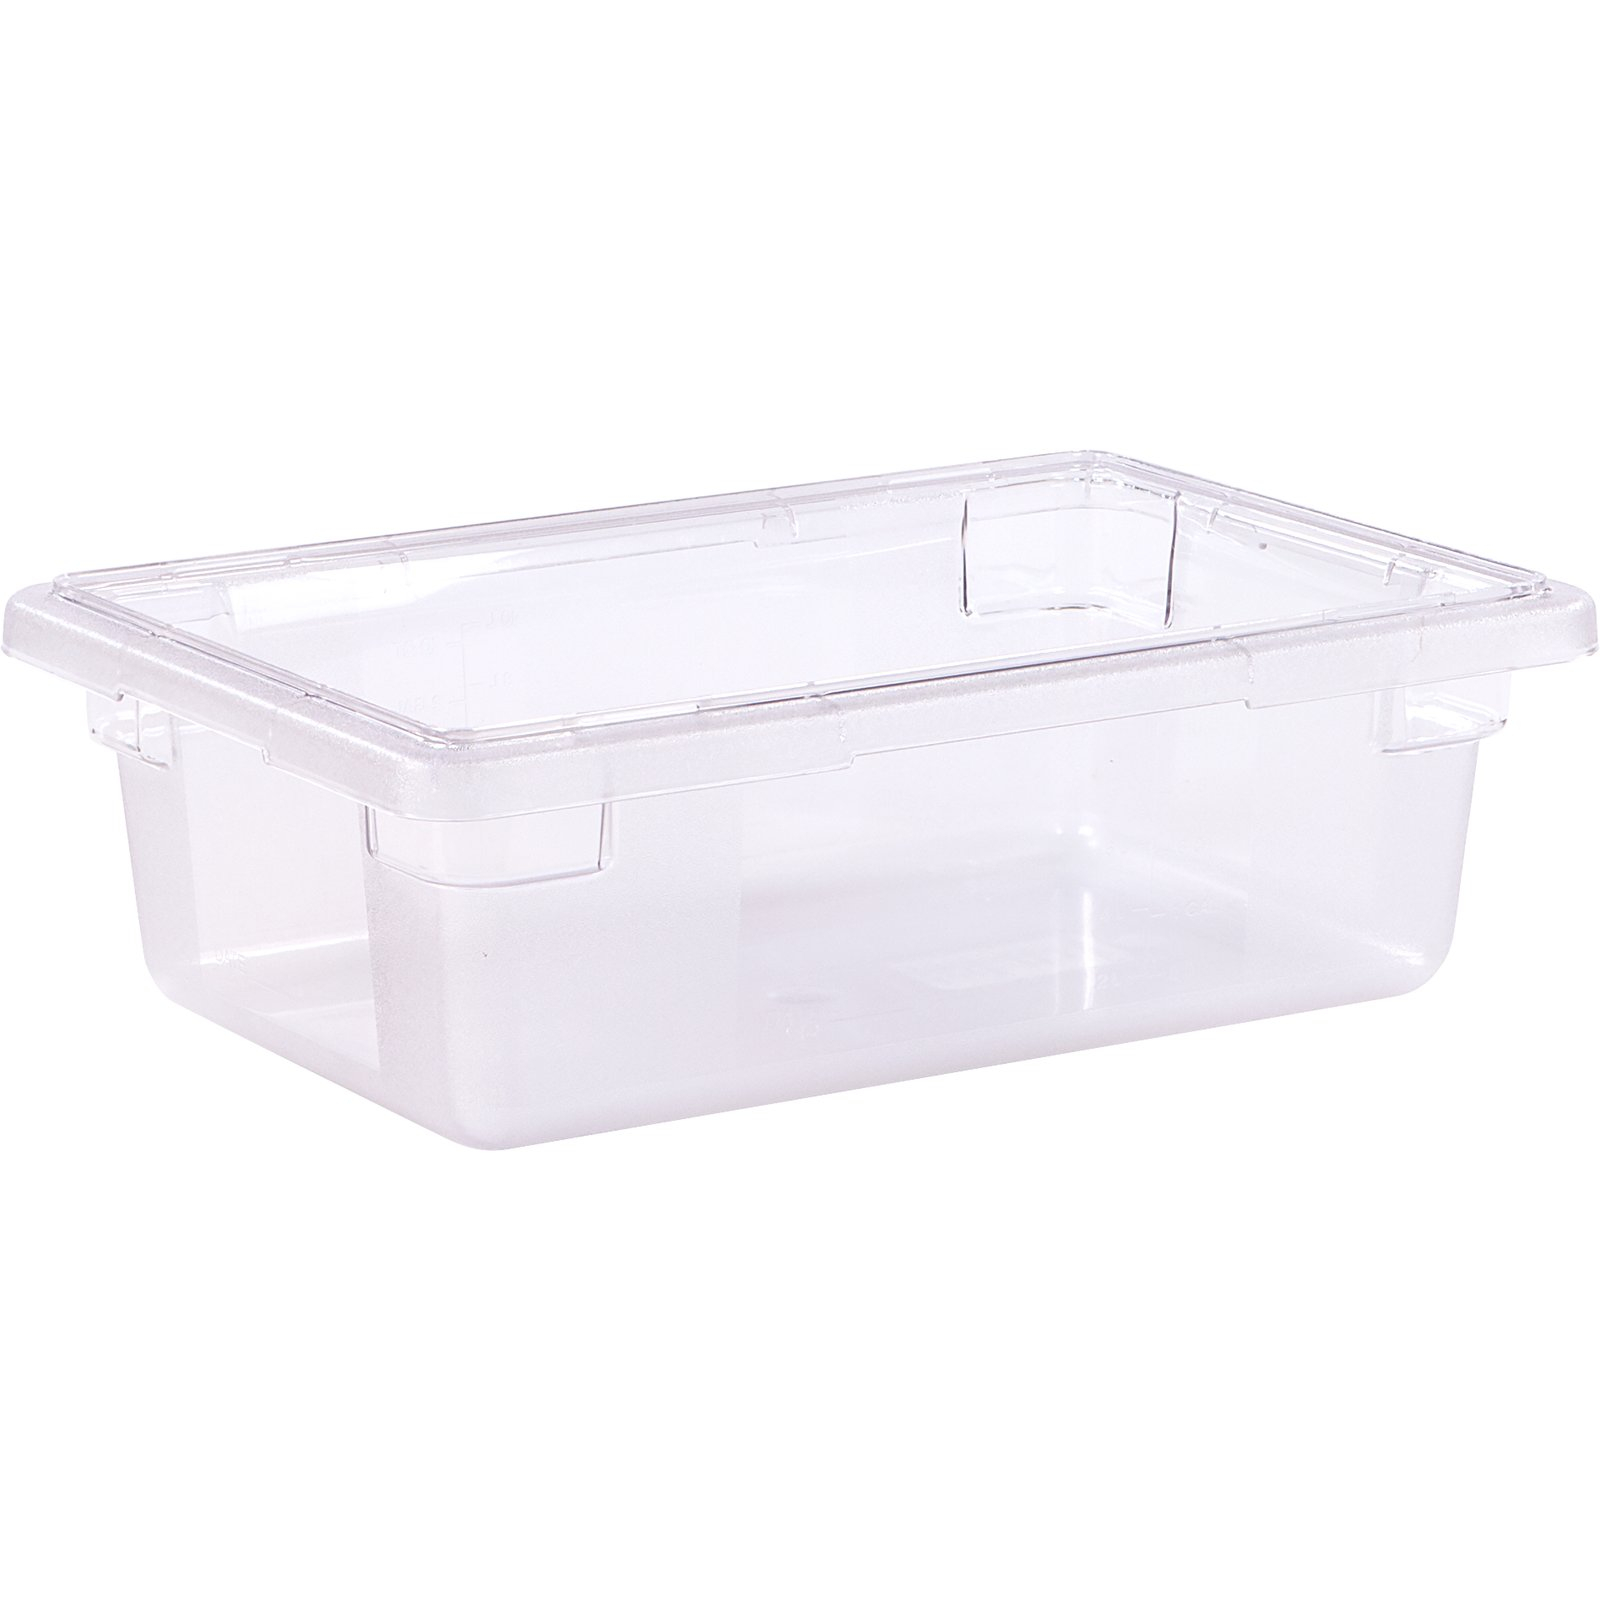 1061107 Storplus Polycarbonate Food Box Storage Container 35 for size 1600 X 1600